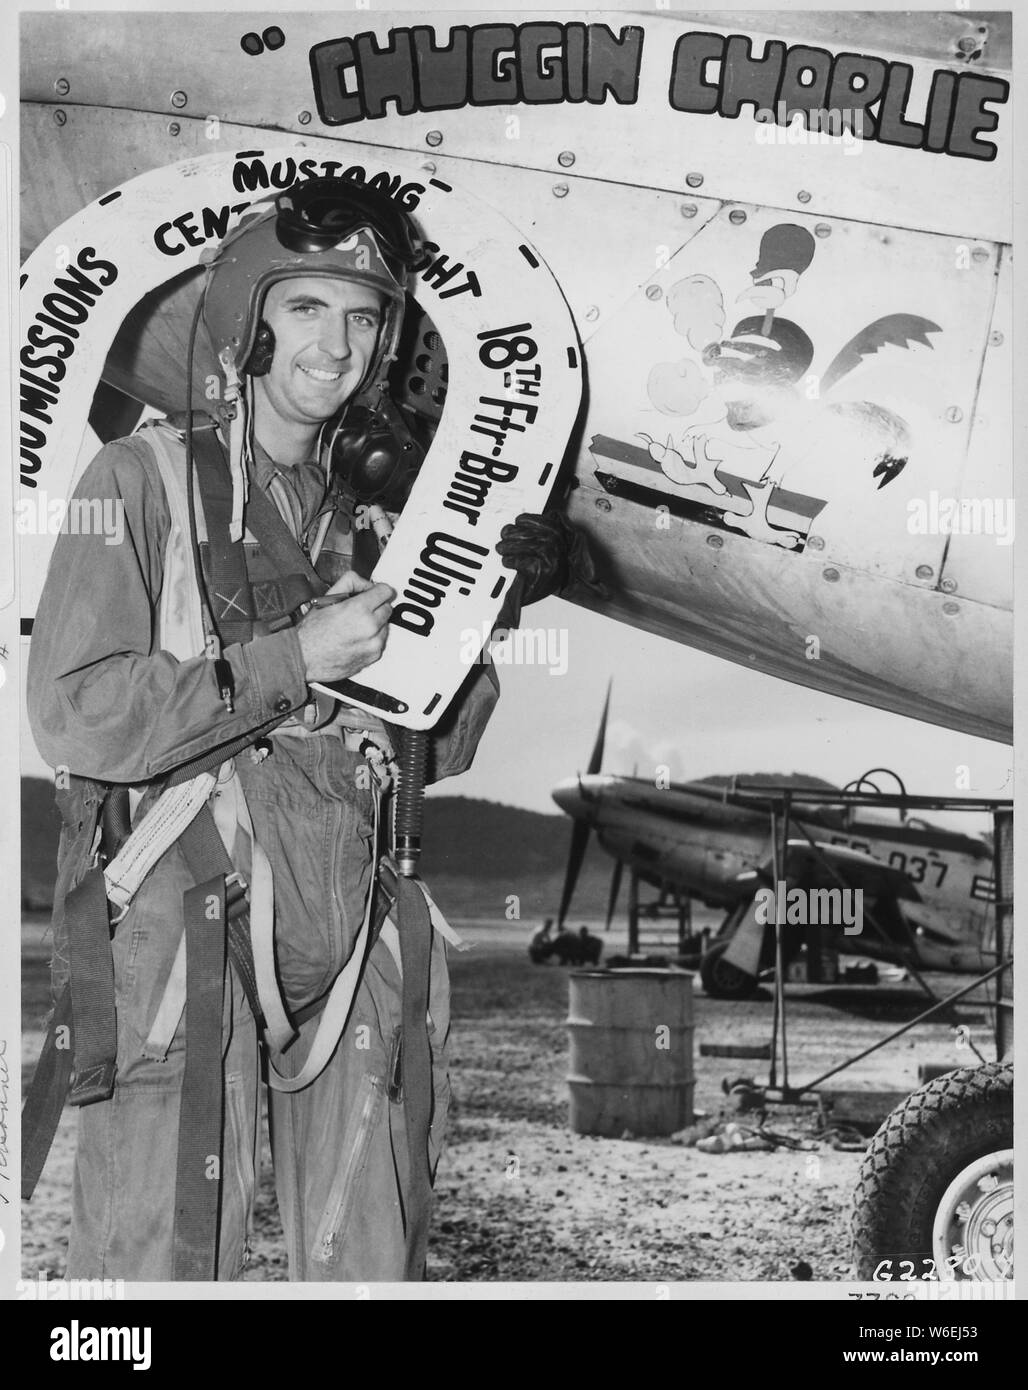 English: 1st. Lt. Walter H. Burke, Stockton, Calif., recently became in good standing of the Century Flight Club of the U.S. Air Force's 18th Fighter Bomber Wing. He poses with the lucky white horseshoe, official emblem of the club, at the completion of his 100th F-51 Mustang combat mission over Communist targets in North Korea. Stock Photo